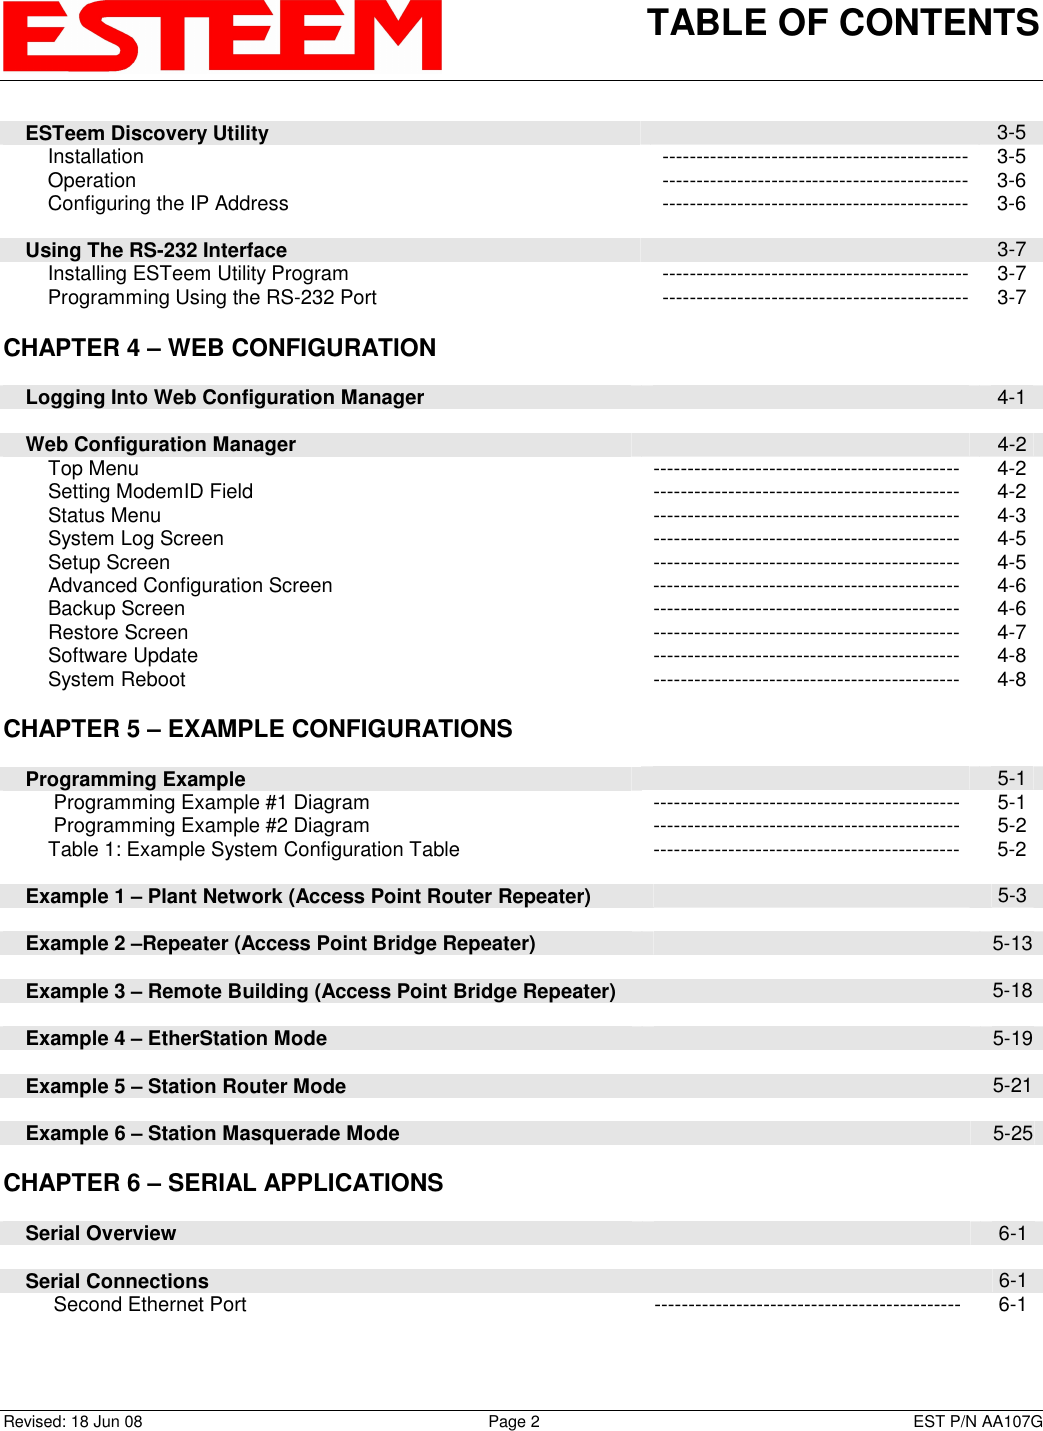 TABLE OF CONTENTS    Revised: 18 Jun 08  Page 2  EST P/N AA107G     ESTeem Discovery Utility   3-5         Installation  --------------------------------------------- 3-5         Operation  --------------------------------------------- 3-6         Configuring the IP Address  --------------------------------------------- 3-6          Using The RS-232 Interface   3-7         Installing ESTeem Utility Program  --------------------------------------------- 3-7         Programming Using the RS-232 Port  --------------------------------------------- 3-7   CHAPTER 4 – WEB CONFIGURATION           Logging Into Web Configuration Manager   4-1          Web Configuration Manager   4-2         Top Menu  ---------------------------------------------  4-2         Setting ModemID Field  ---------------------------------------------  4-2         Status Menu  ---------------------------------------------  4-3         System Log Screen  ---------------------------------------------  4-5         Setup Screen  ---------------------------------------------  4-5         Advanced Configuration Screen  ---------------------------------------------  4-6         Backup Screen  ---------------------------------------------  4-6         Restore Screen  ---------------------------------------------  4-7         Software Update  ---------------------------------------------  4-8         System Reboot  ---------------------------------------------  4-8      CHAPTER 5 – EXAMPLE CONFIGURATIONS           Programming Example   5-1          Programming Example #1 Diagram  ---------------------------------------------  5-1          Programming Example #2 Diagram  ---------------------------------------------  5-2         Table 1: Example System Configuration Table  ---------------------------------------------  5-2          Example 1 – Plant Network (Access Point Router Repeater)   5-3          Example 2 –Repeater (Access Point Bridge Repeater)   5-13          Example 3 – Remote Building (Access Point Bridge Repeater)   5-18          Example 4 – EtherStation Mode   5-19          Example 5 – Station Router Mode   5-21          Example 6 – Station Masquerade Mode   5-25      CHAPTER 6 – SERIAL APPLICATIONS           Serial Overview   6-1          Serial Connections   6-1          Second Ethernet Port  ---------------------------------------------  6-1      